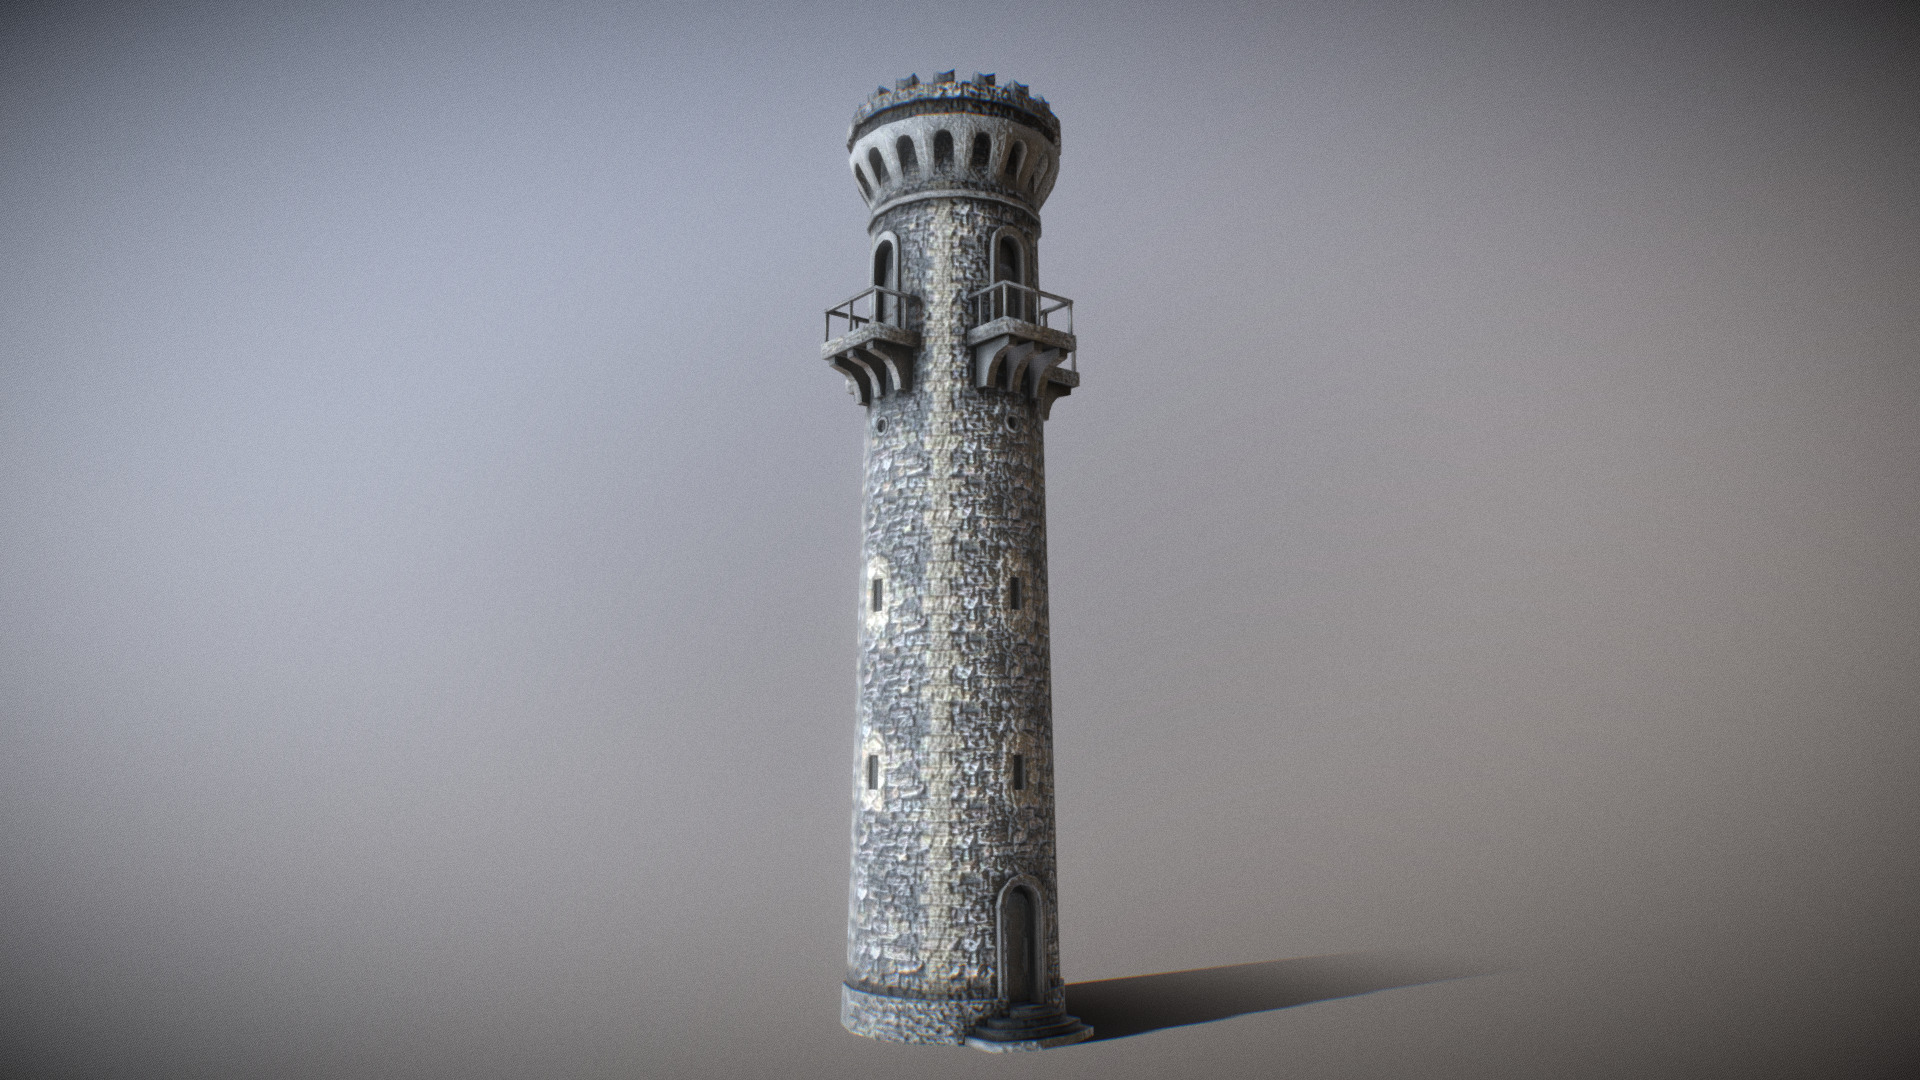 This is a model of an old watchtower, which was constructed on the Kickelhan a mountain near Ilmenau, where i am living.









On google earth:
https://www.youtube.com/watch?v=00VBjT61JvQ - Kickelhahn Tower - Download Free 3D model by 3DHaupt (@dennish2010) 3d model